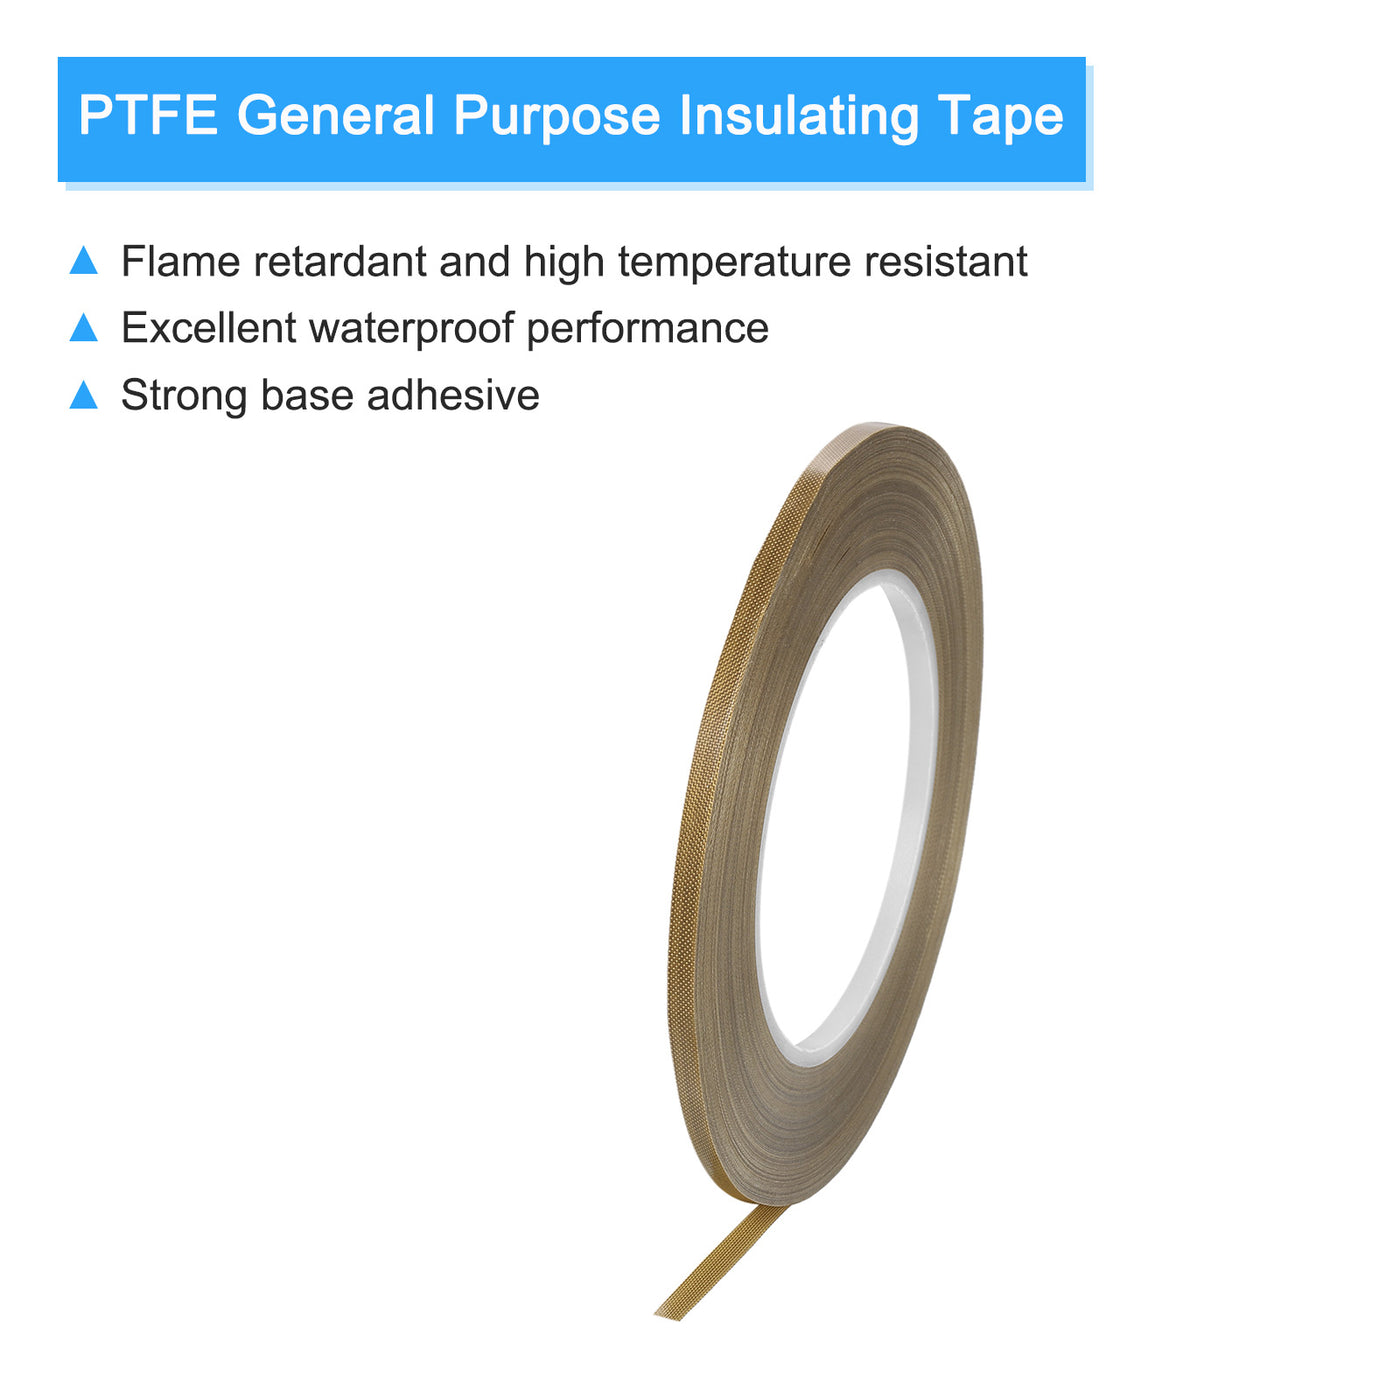 Harfington High Temperature Tape 3mm PTFE Coated Fabric Tape Heat Resistant Tape for Vacuum Sealers Adhesive Tape 50m/164ft Brown 0.18mm Thickness